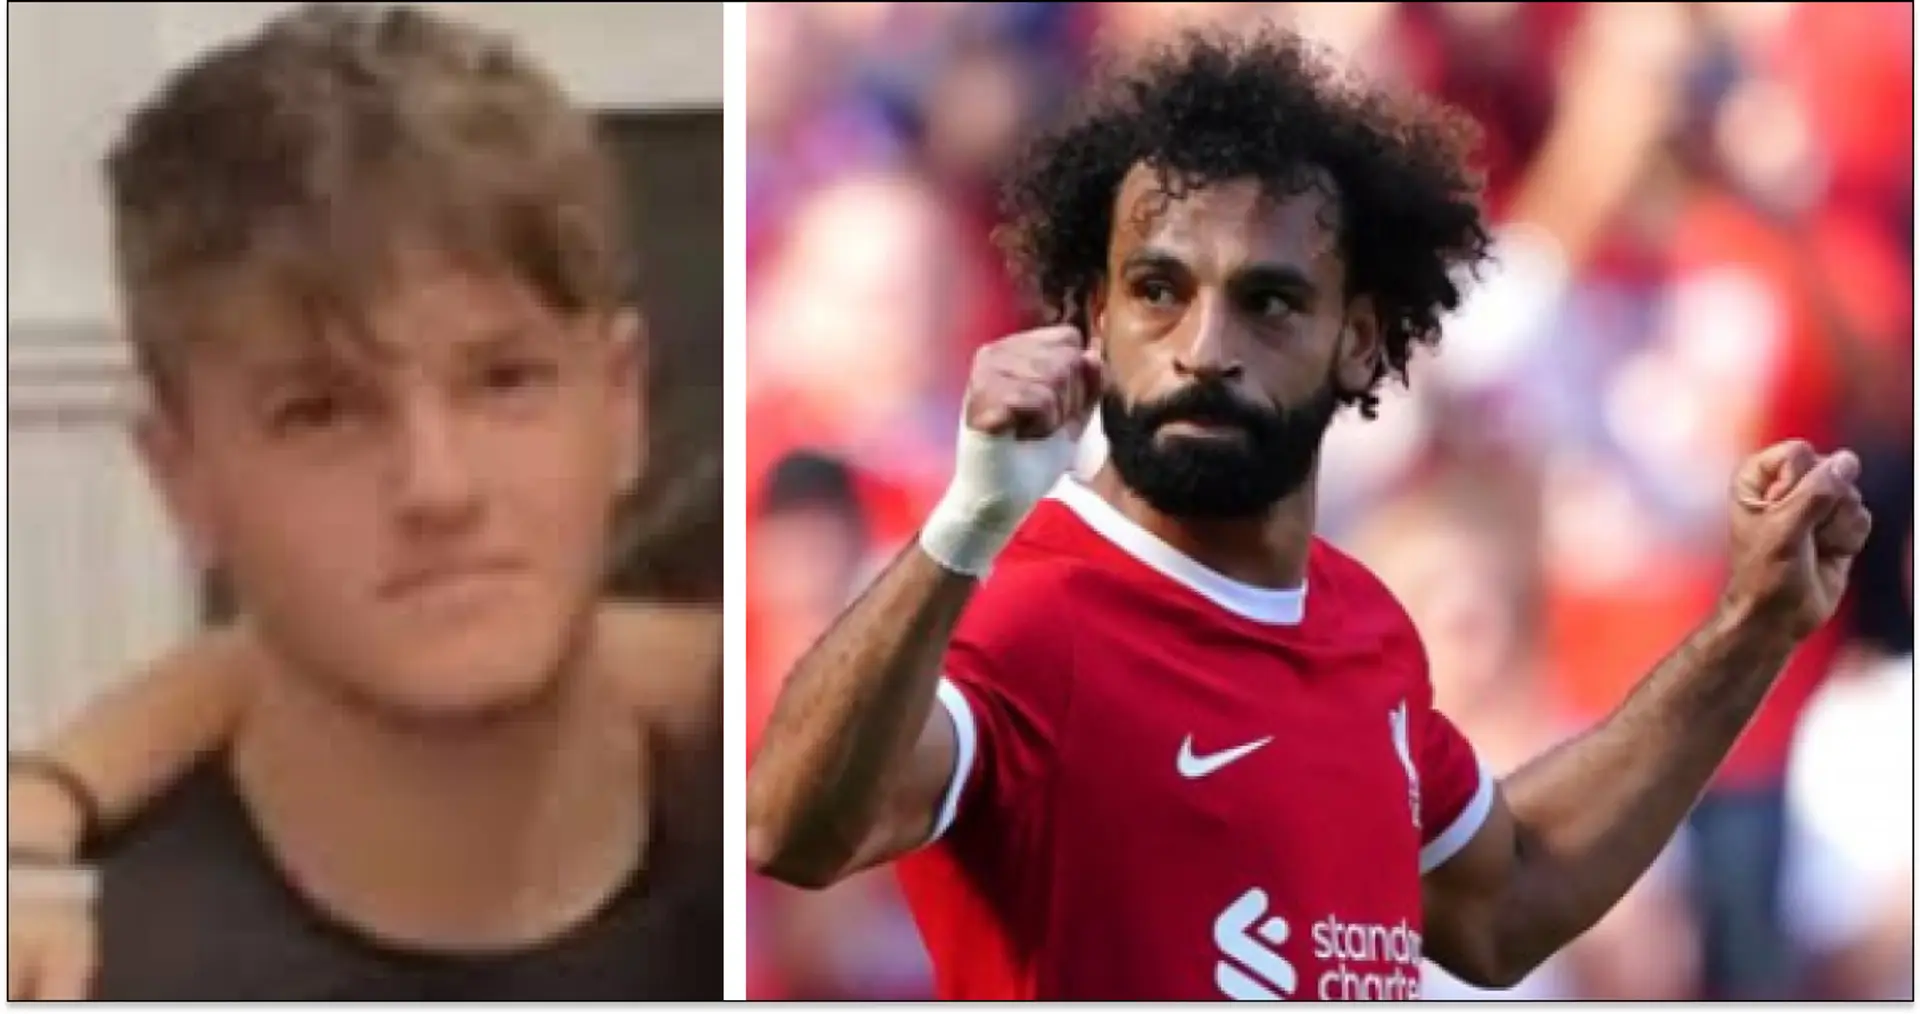 'Because I'm an idiot': Everton fan pleads guilty to mocking Heysel disaster & racially abusing Salah